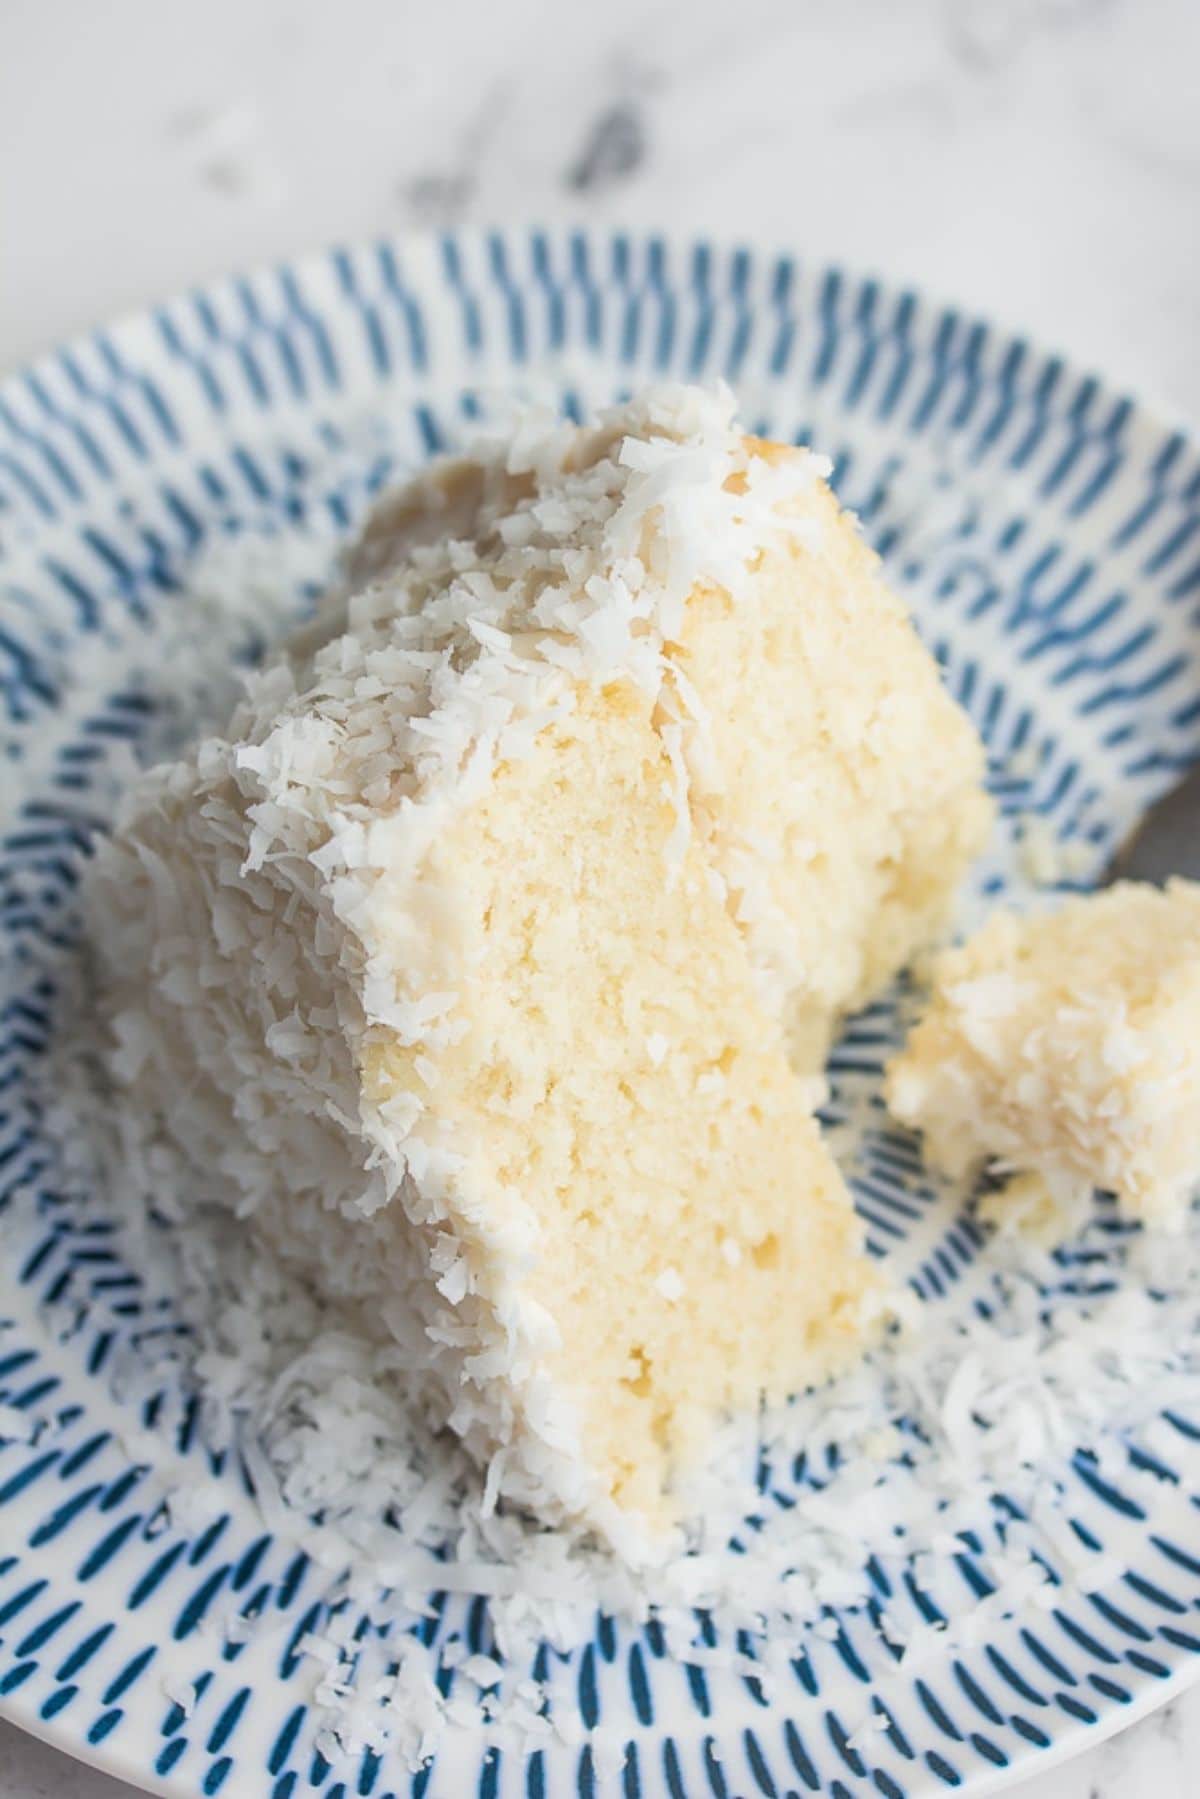 a slice of coconut cake on a blue and white plate with a bote taken out of it